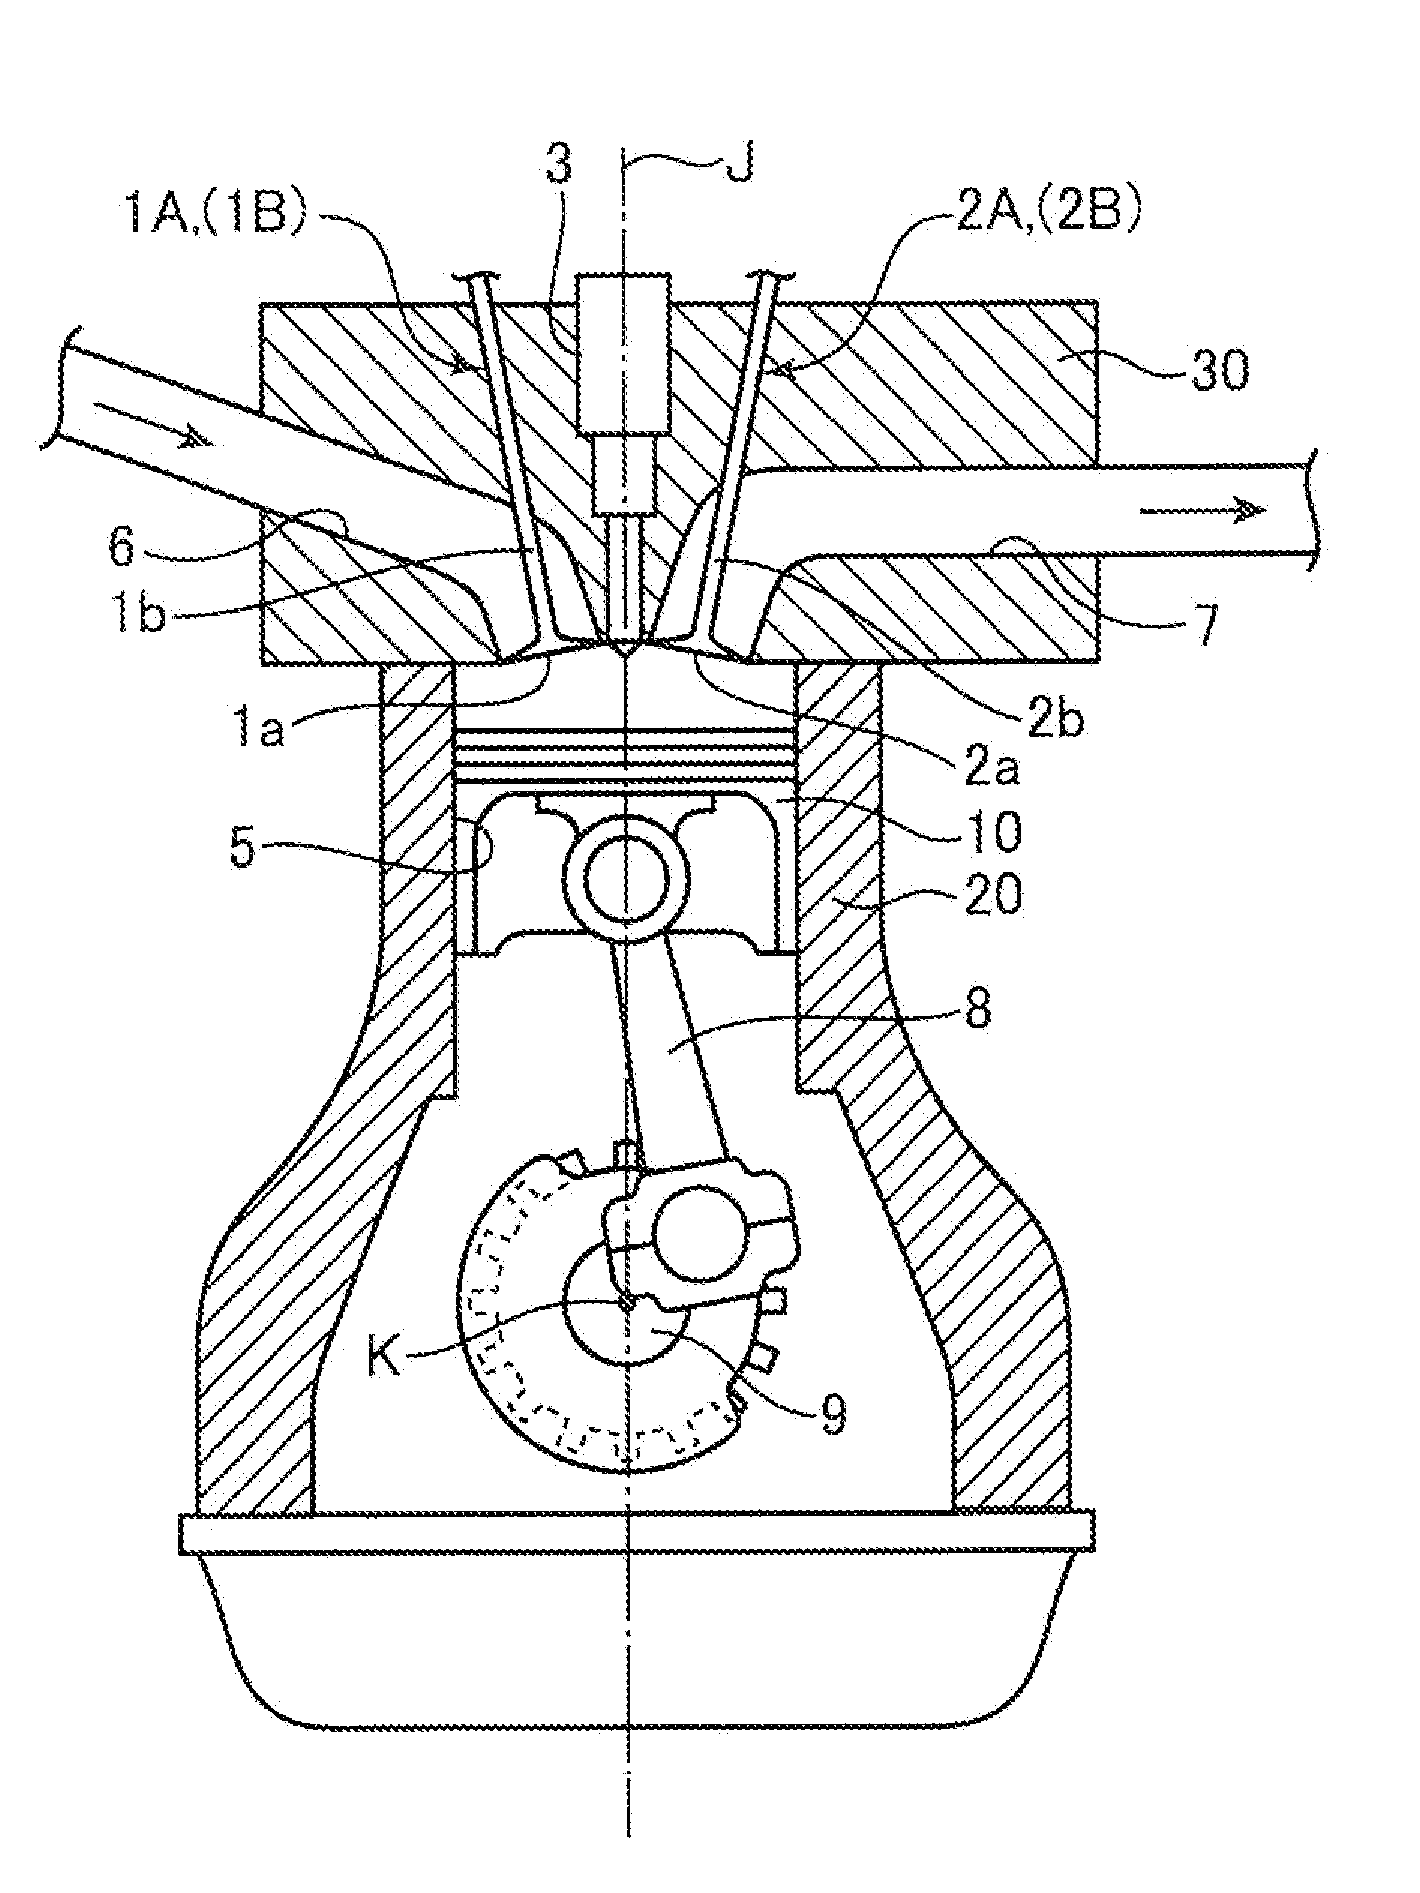 Combustion chamber structure for engine